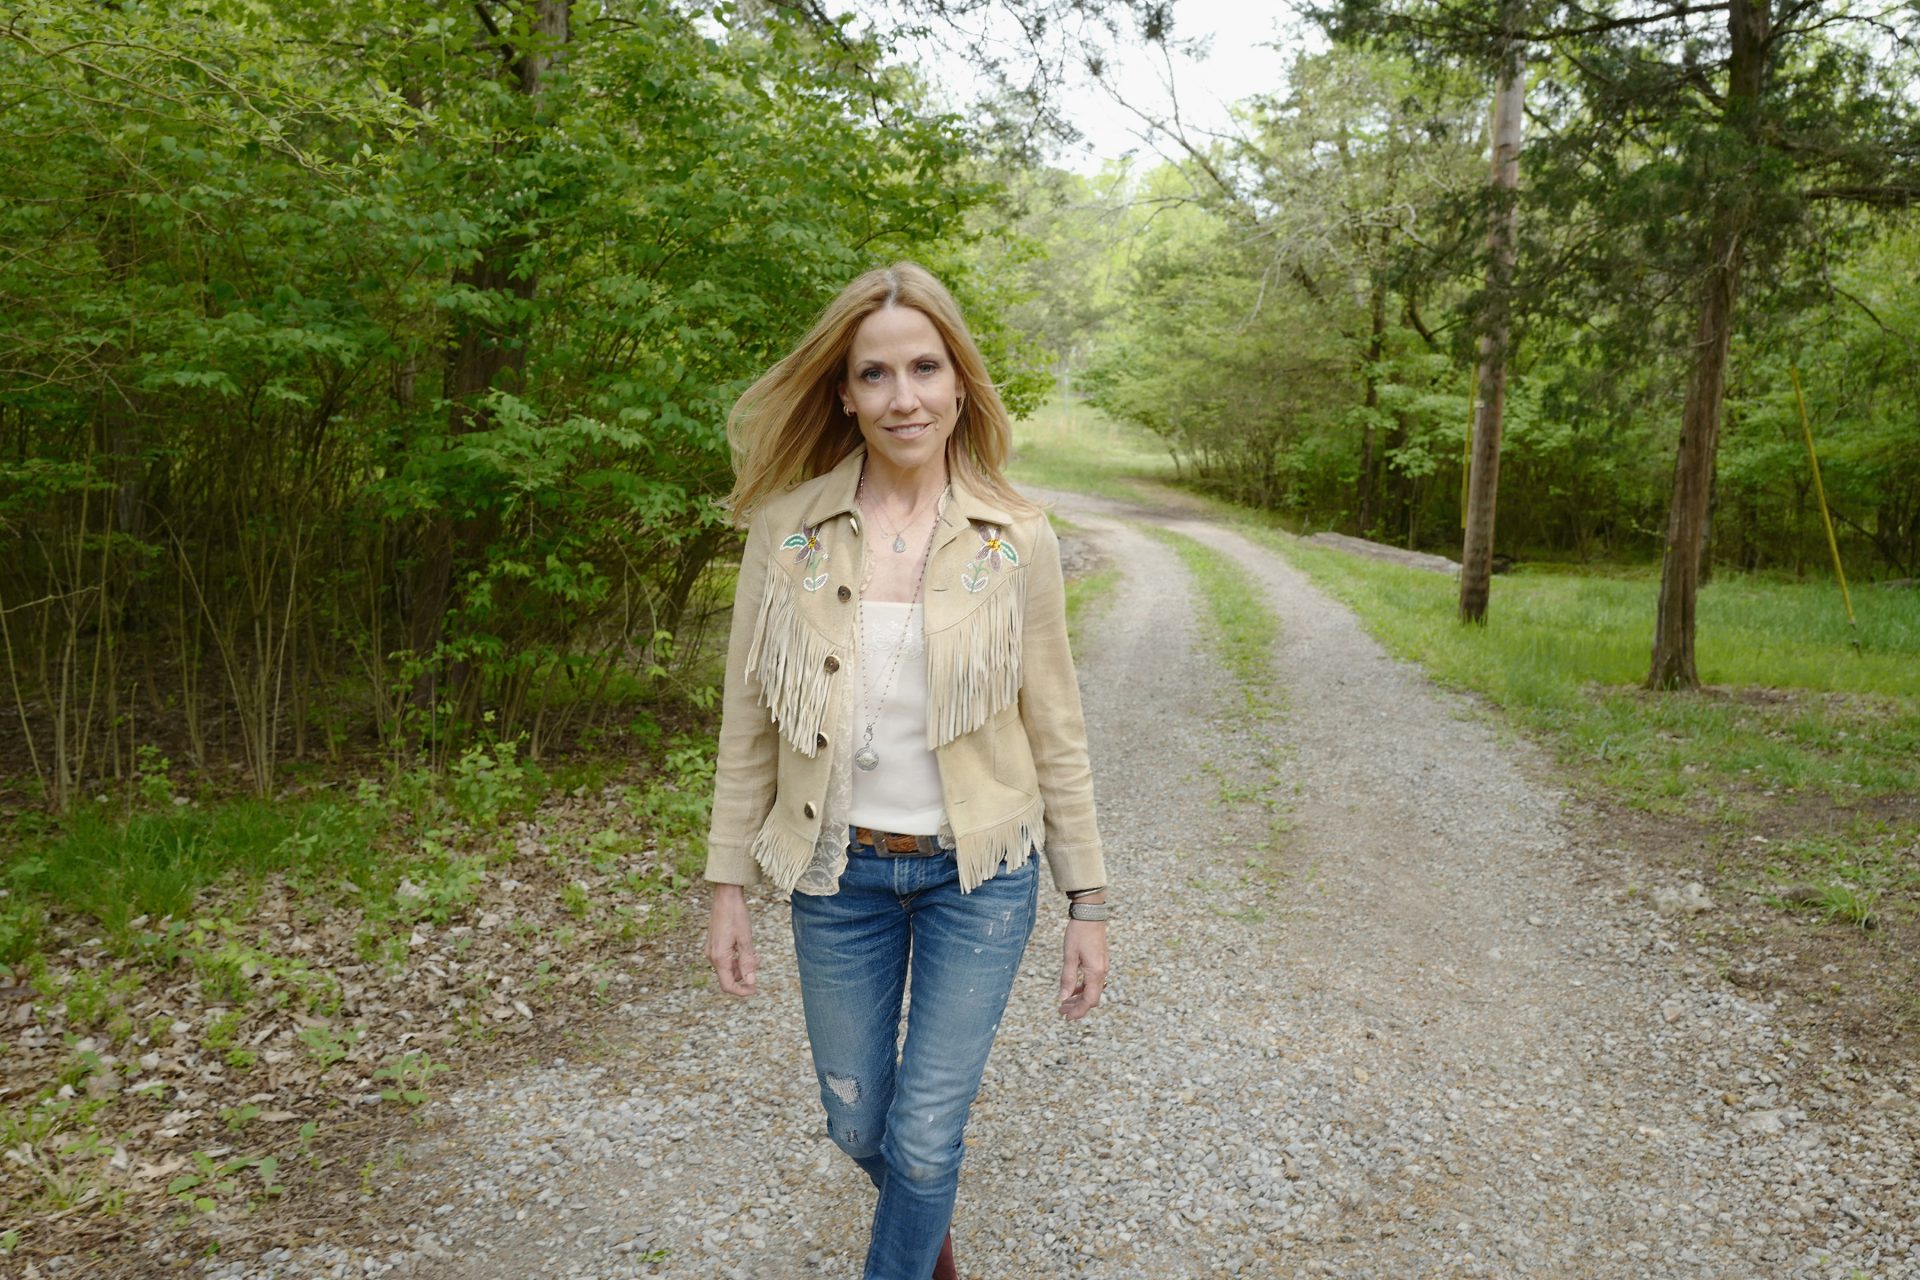 Reactions: Sheryl Crow slams the track for 